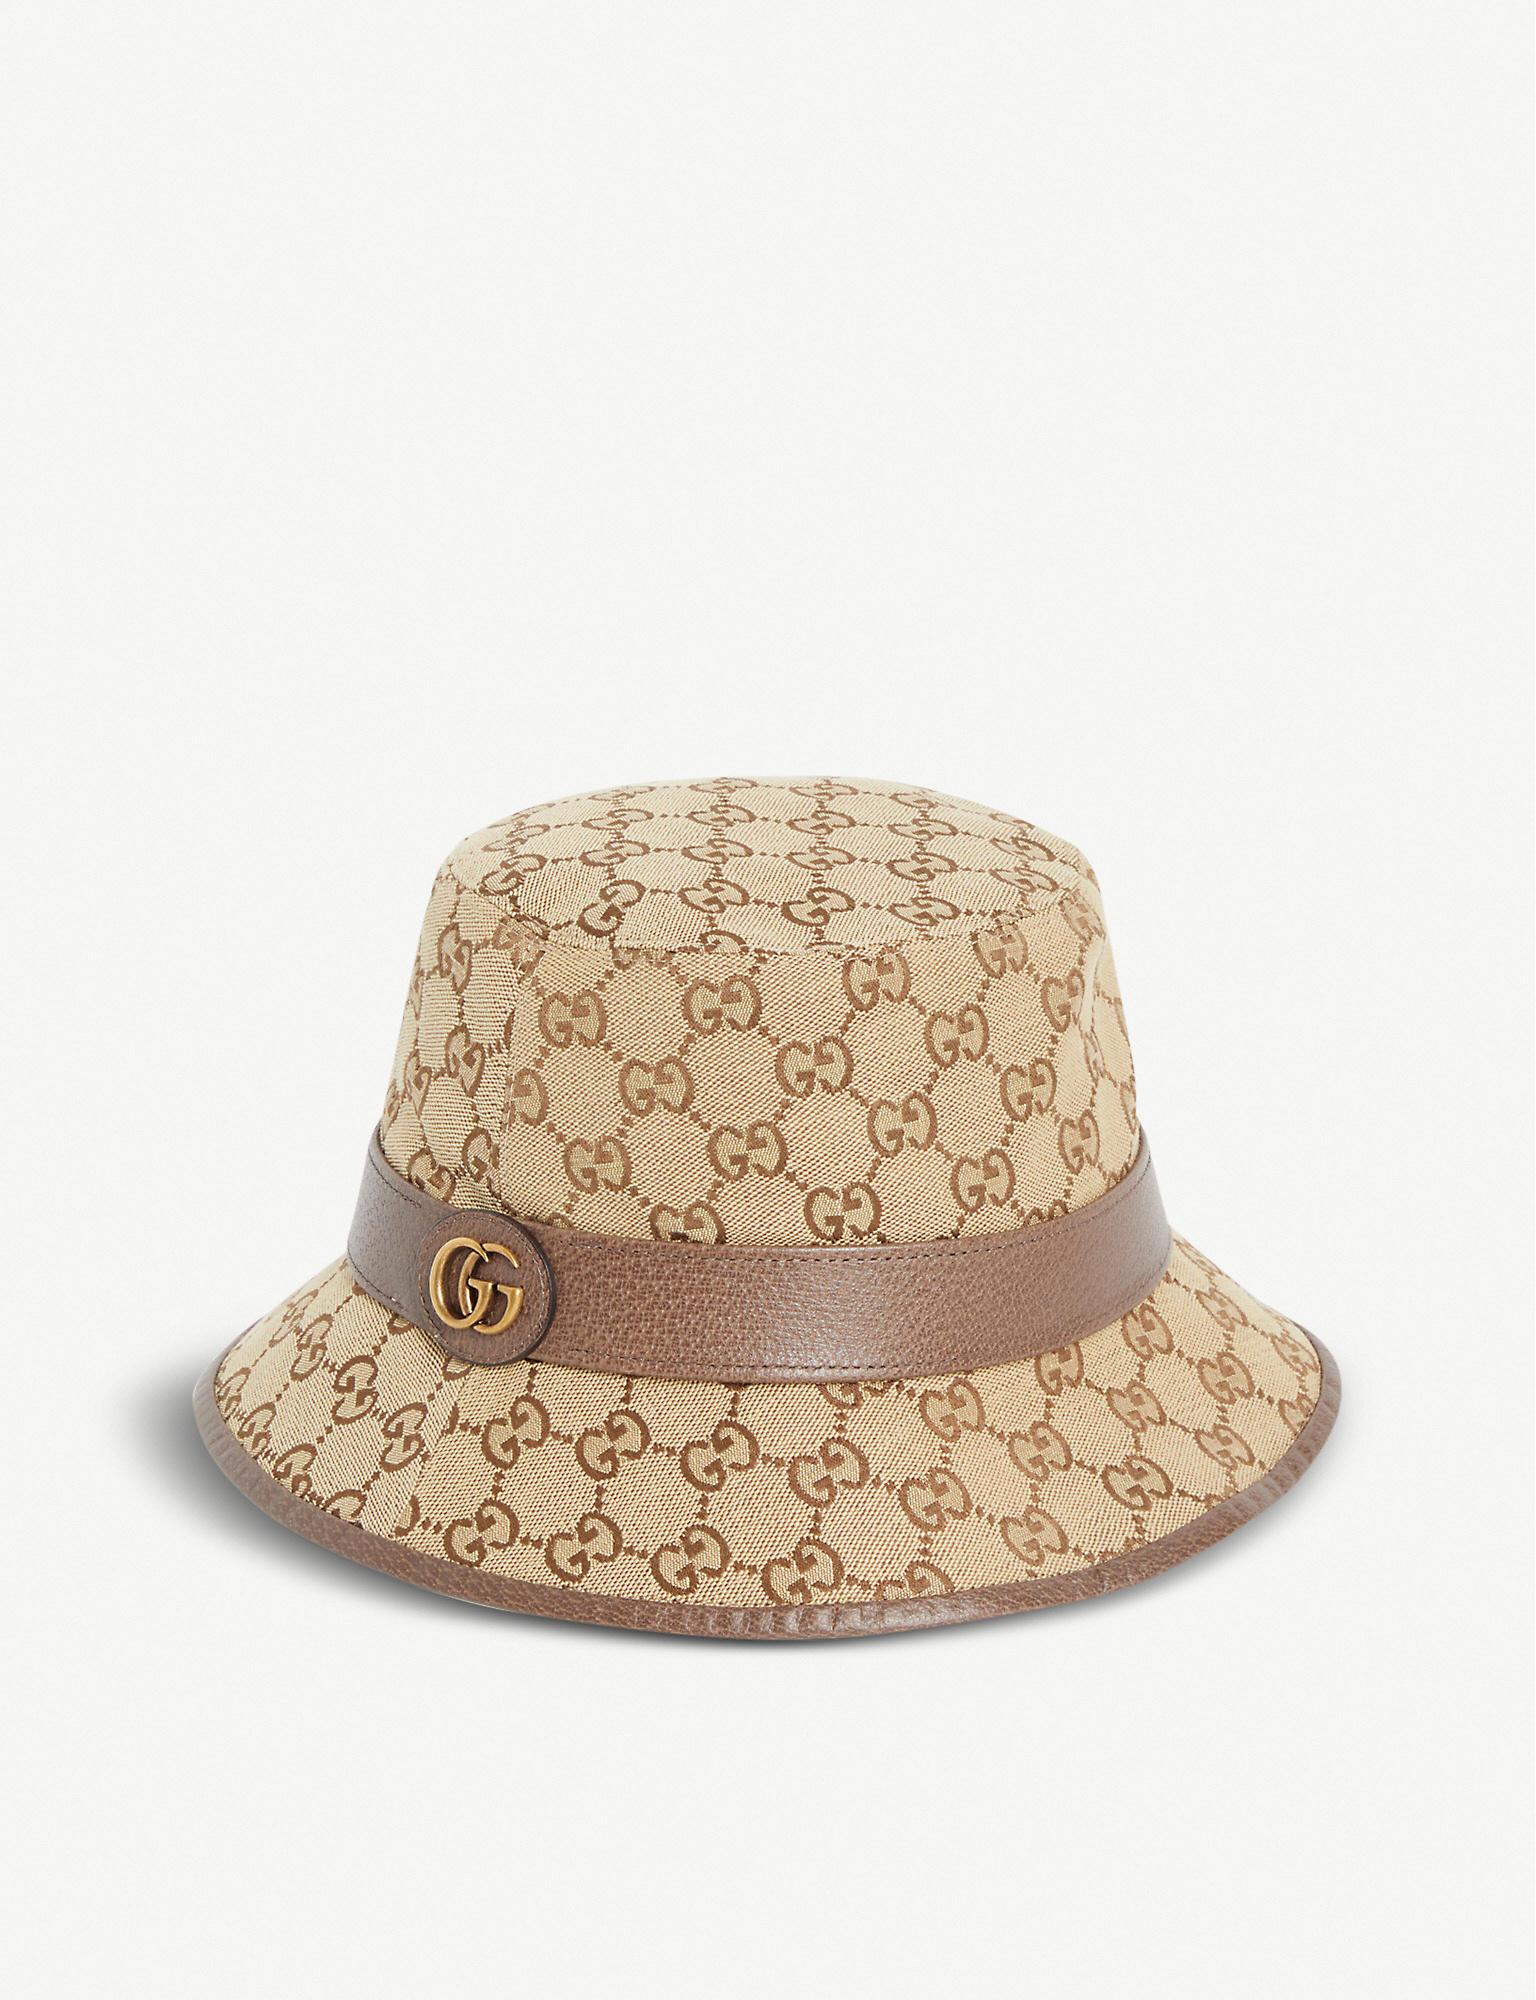 Gucci Monogrammed Canvas Bucket Hat in Natural for Men - Lyst